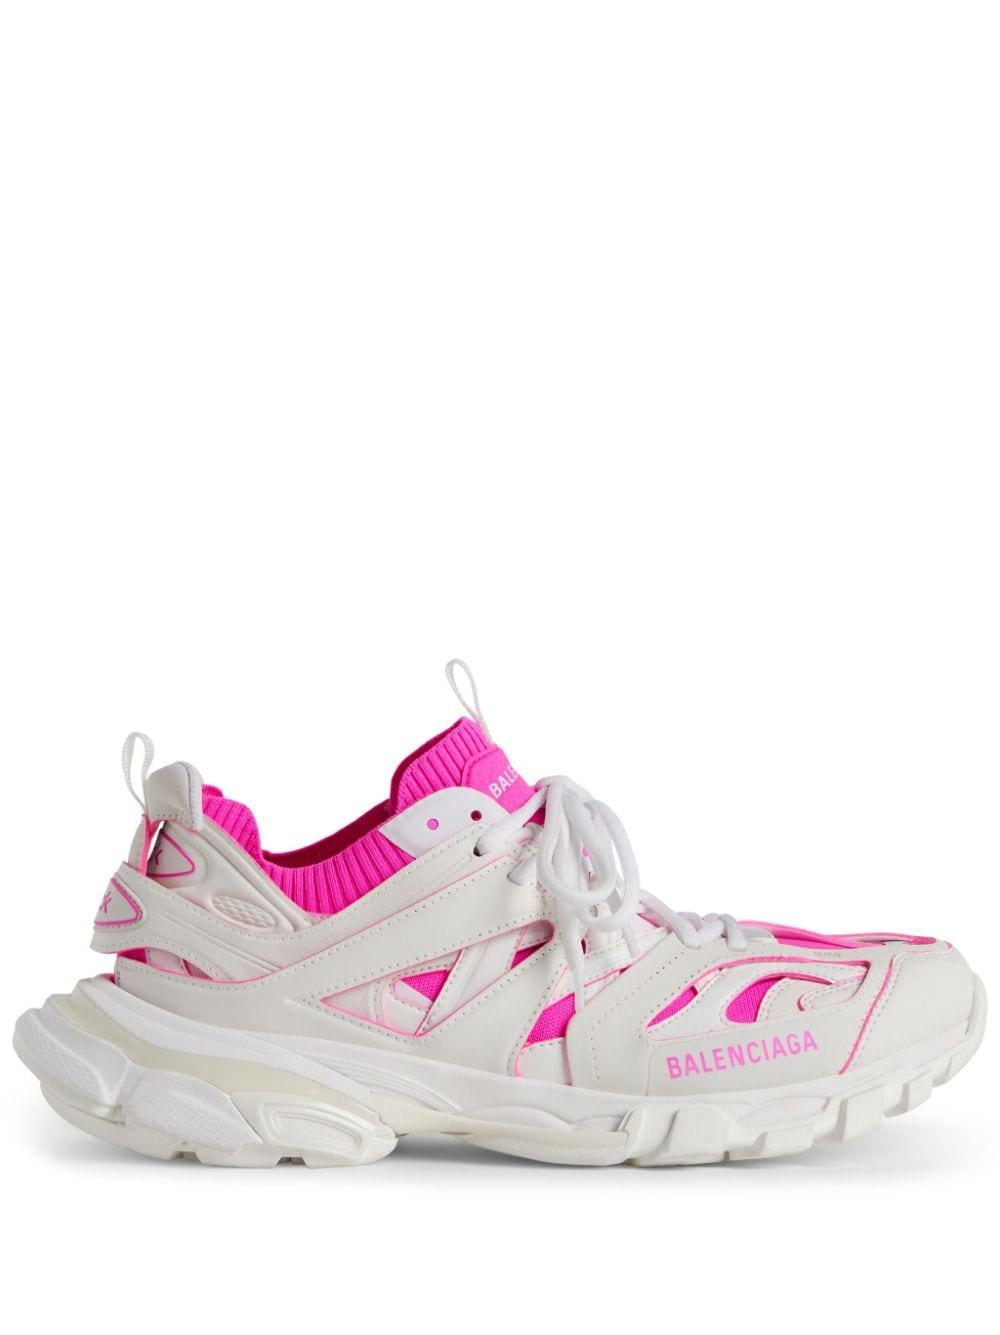 Balenciaga Track Sock Sneakers in Pink | Lyst